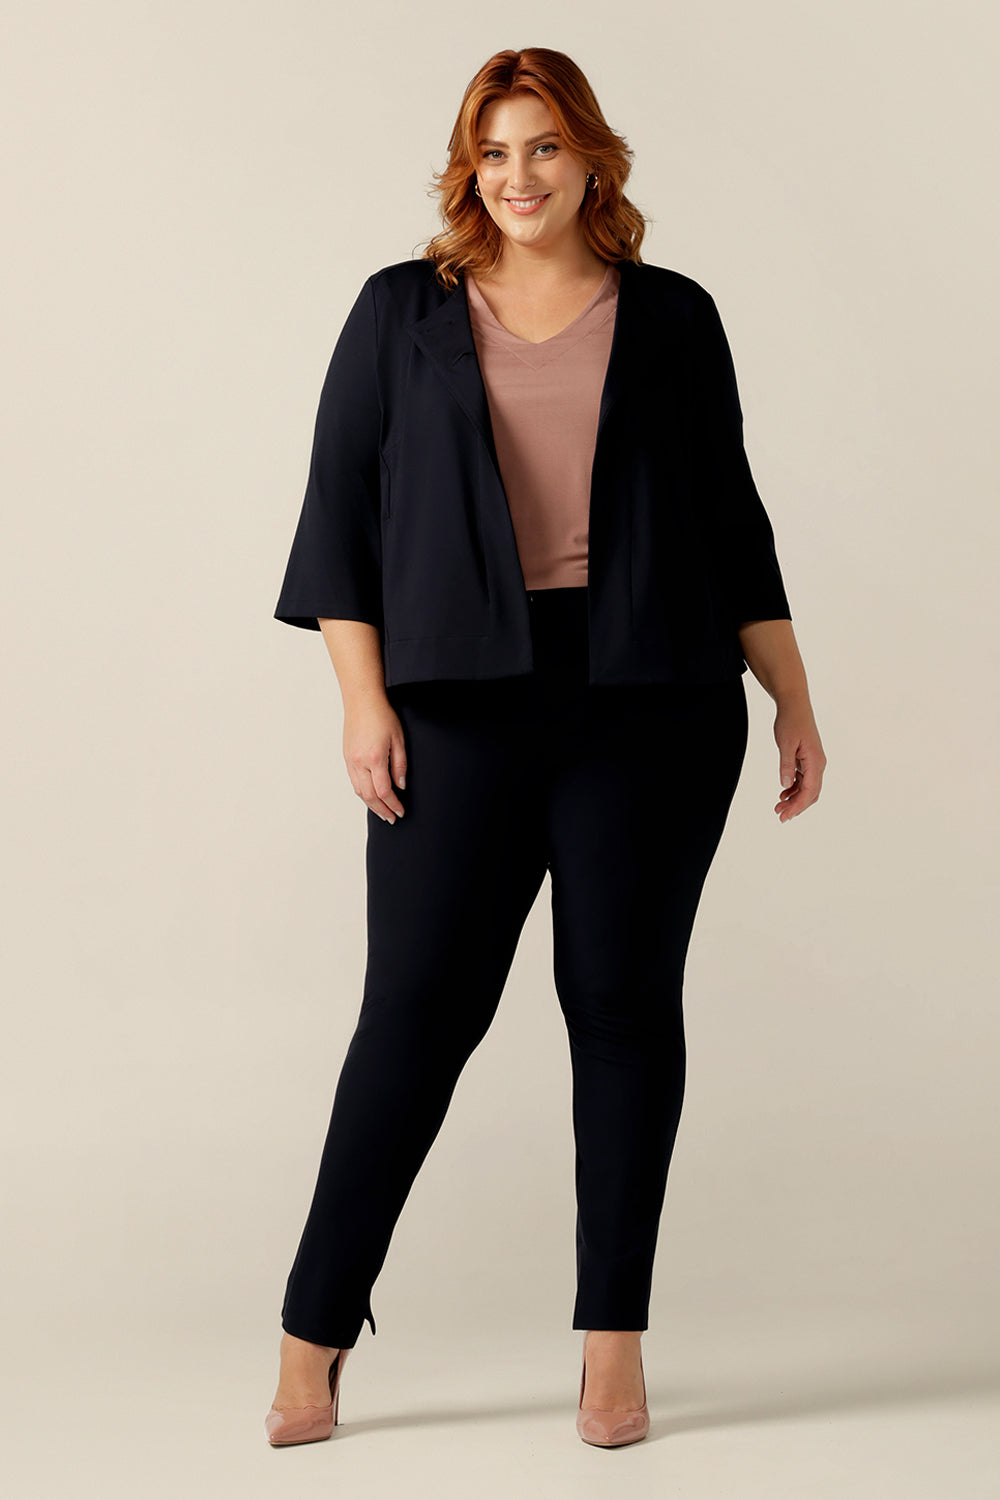 A plus size, size 18 woman wears a round neck navy work wear jacket with 3/4 sleeves